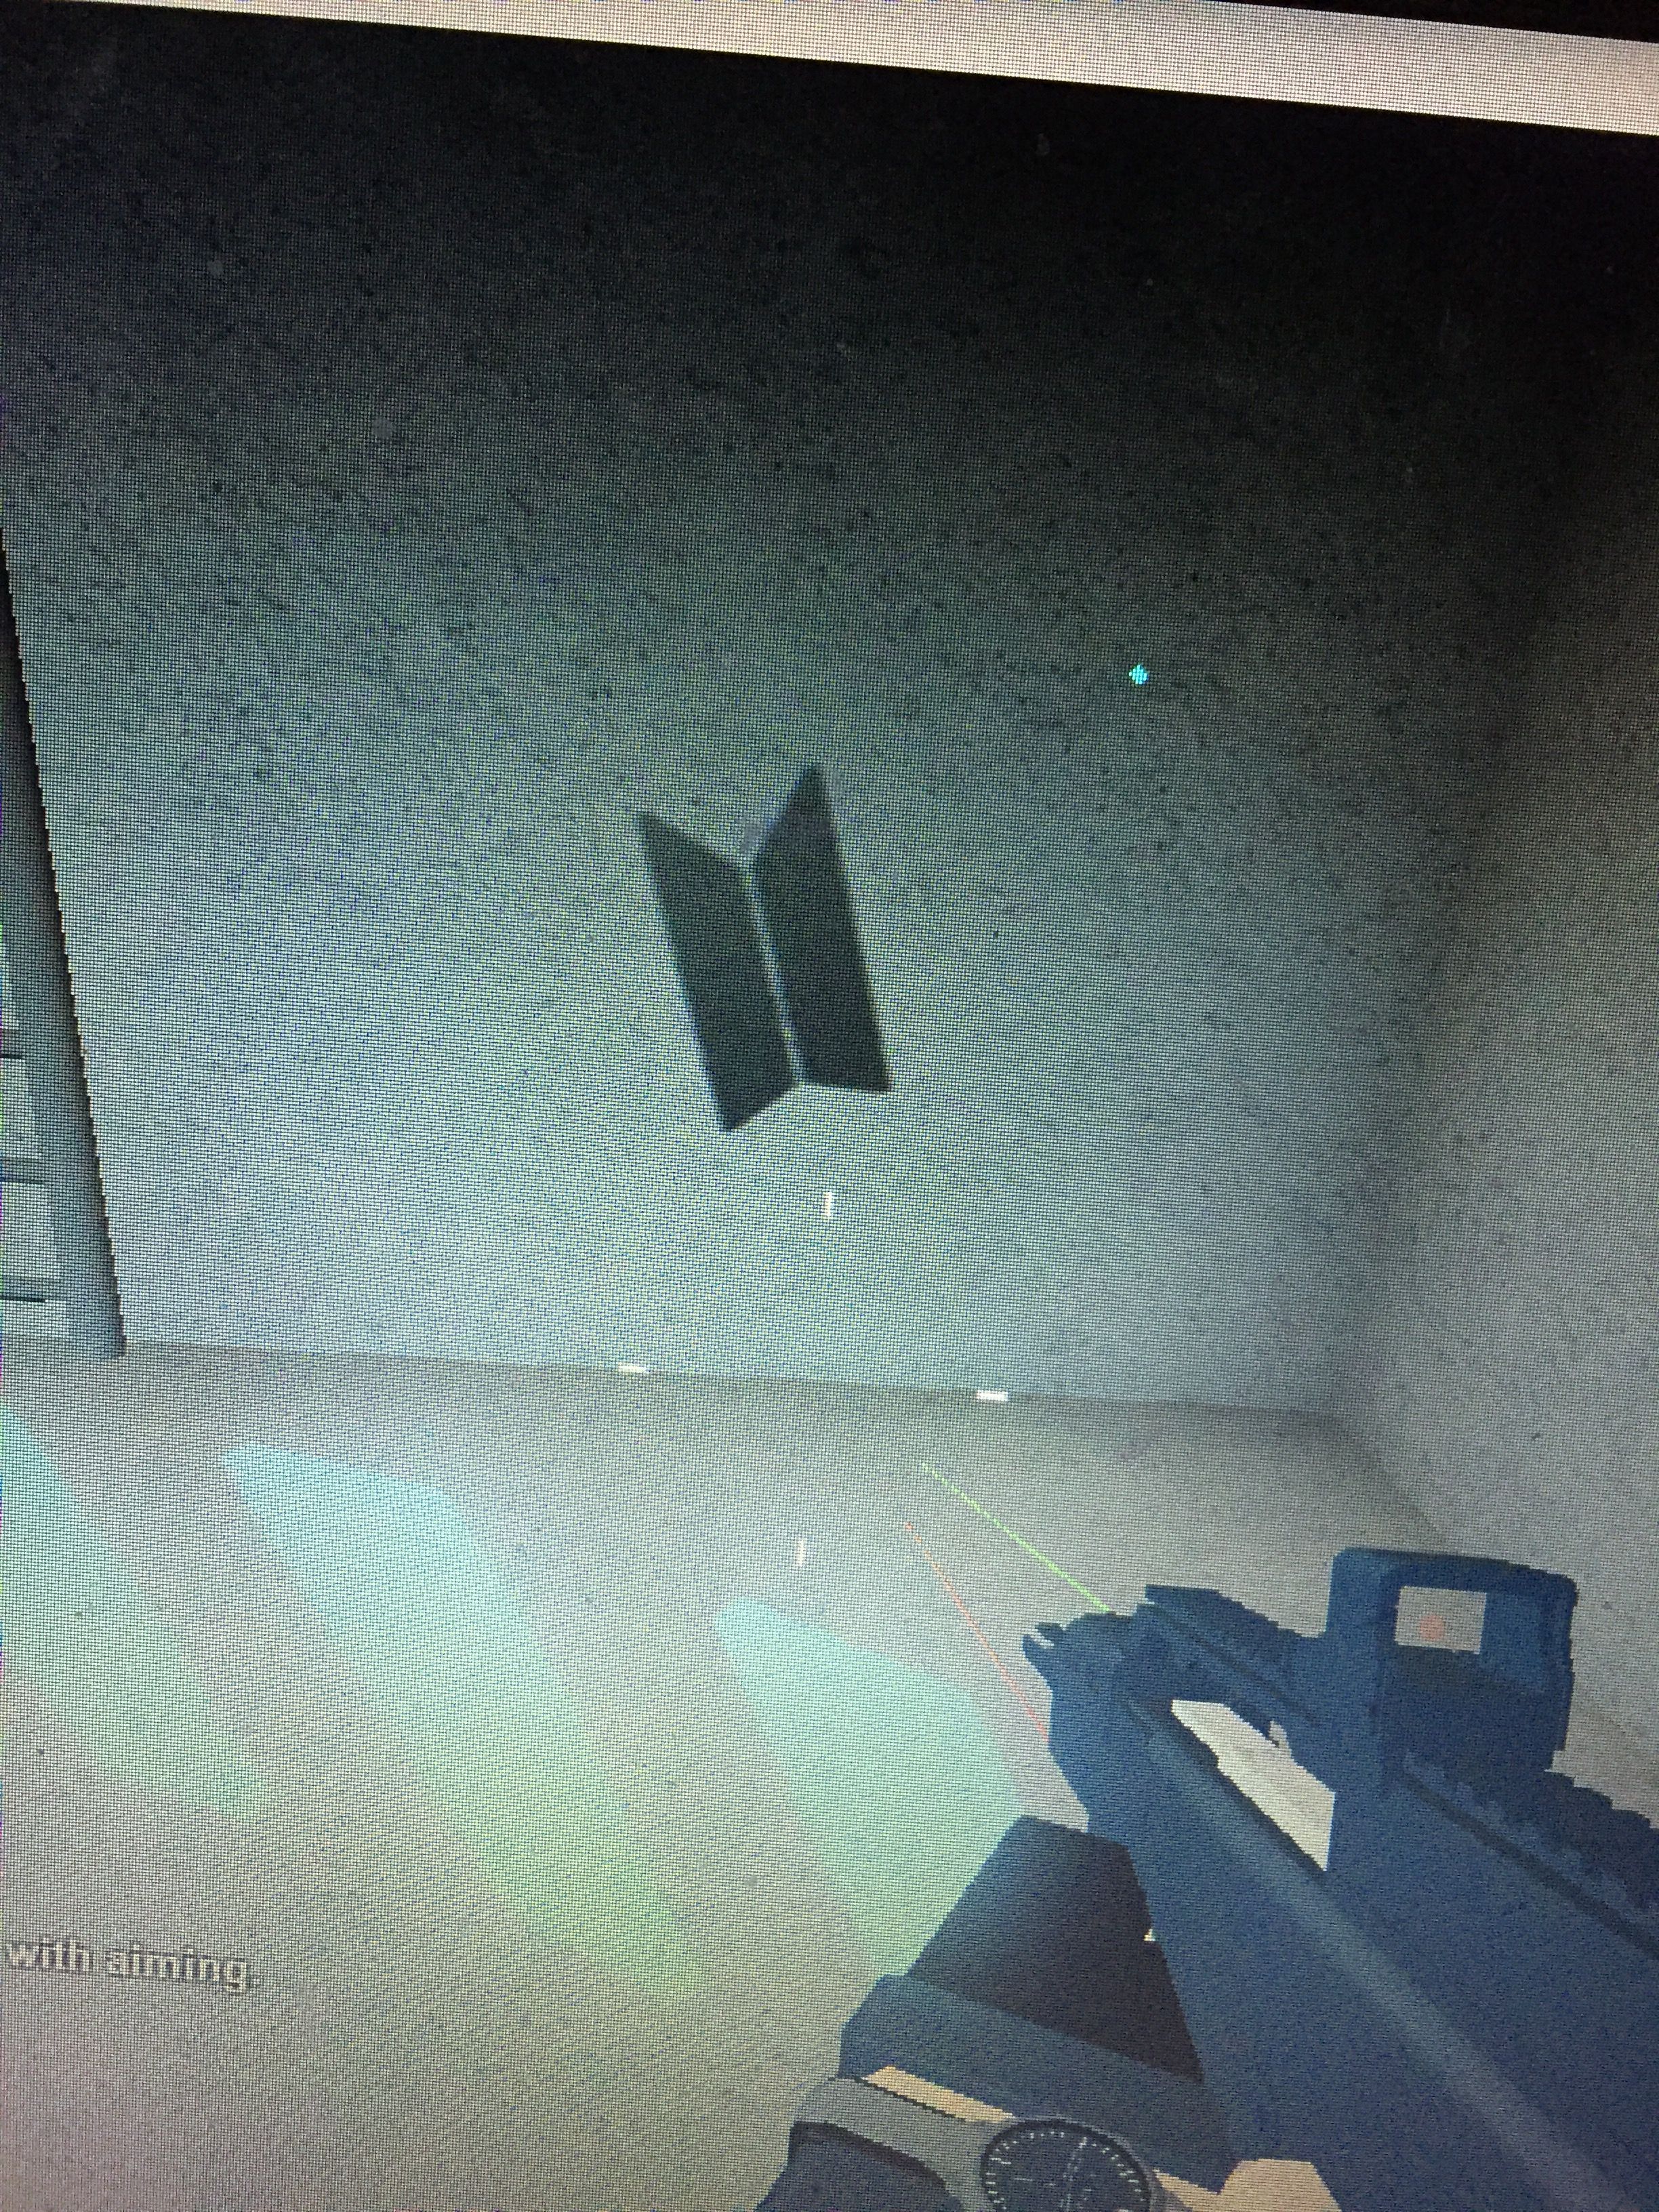 While playing Roblox: Phantom Forces. I found the BTS logo.